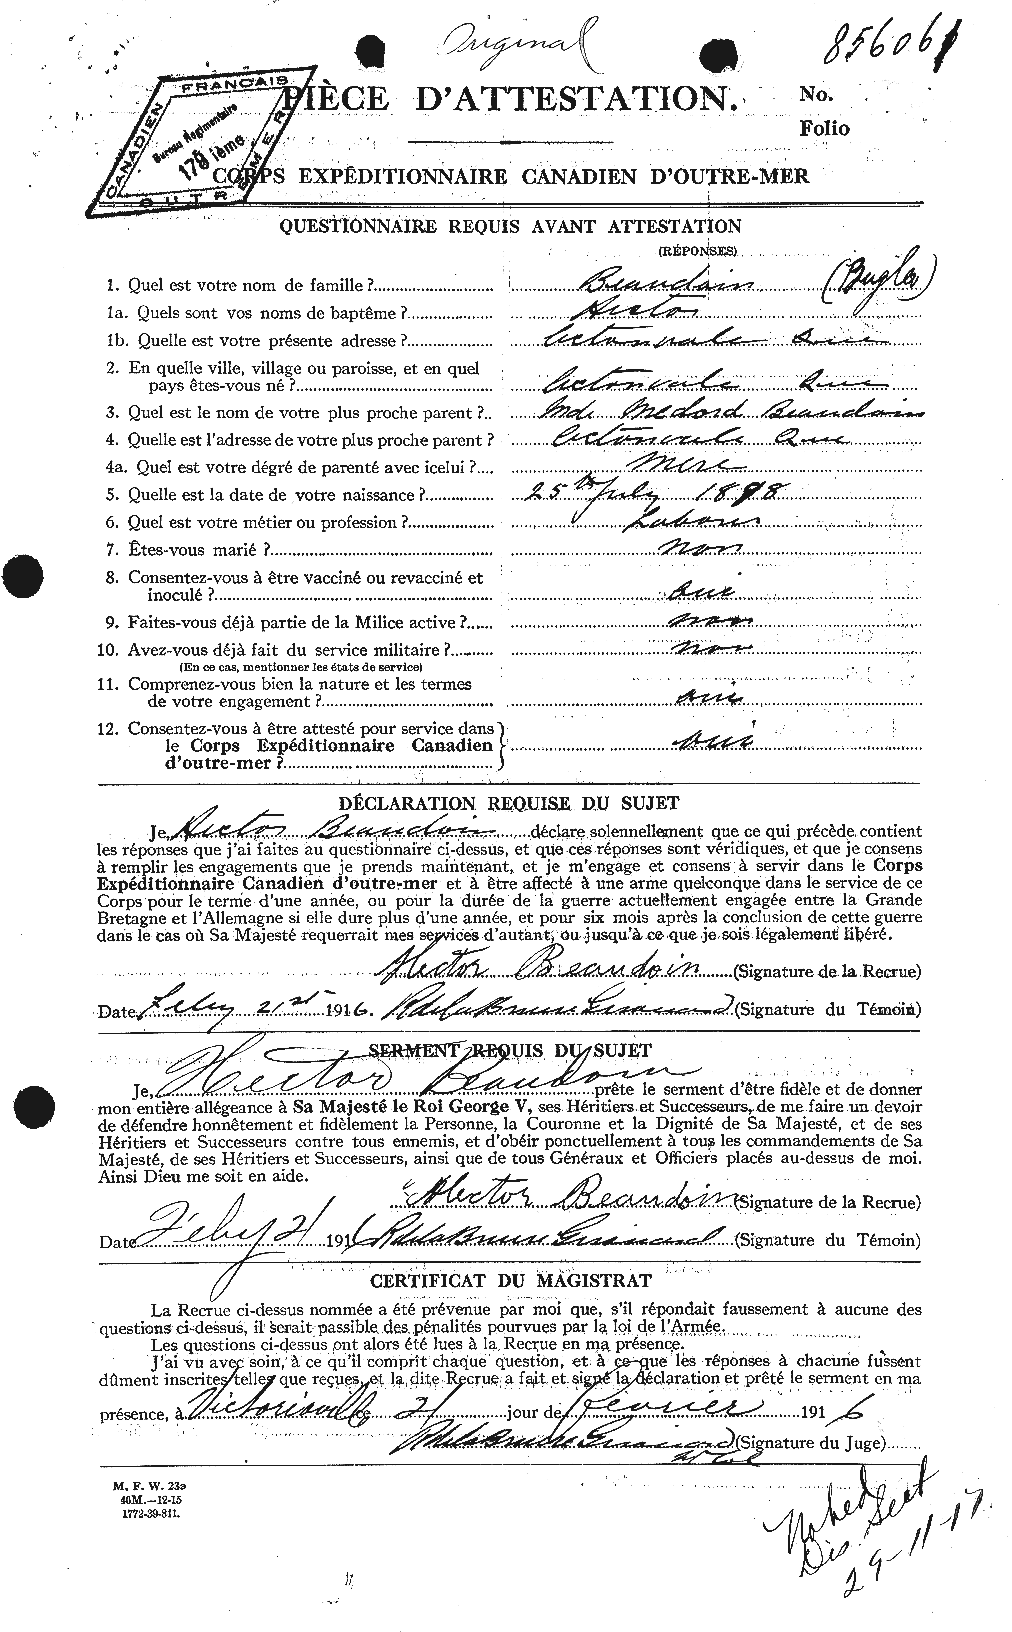 Personnel Records of the First World War - CEF 231238a